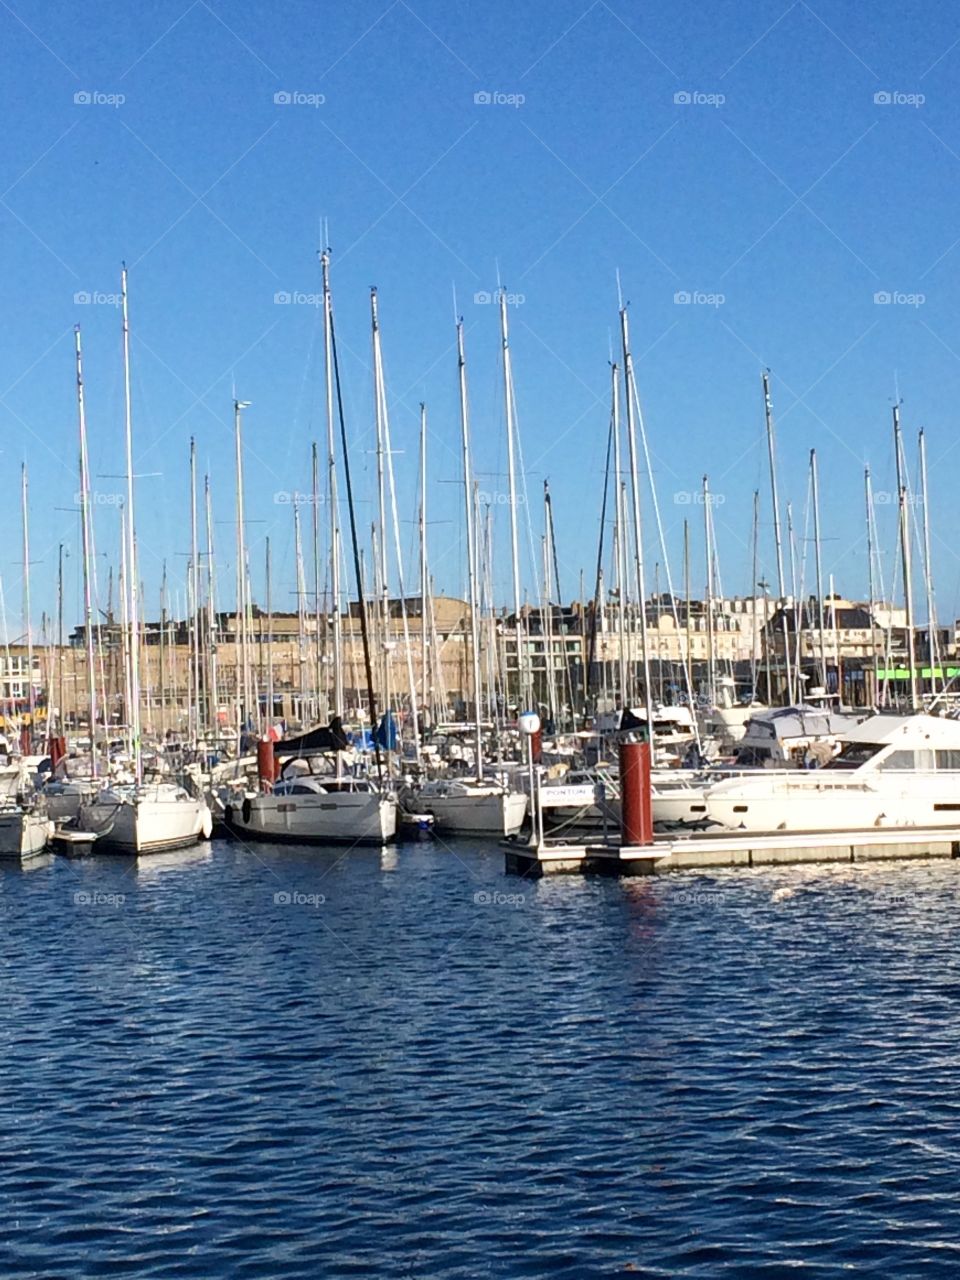 Boats in the harbour - sunny summer day in France. Not a cloud in the sky. The great outdoors. 